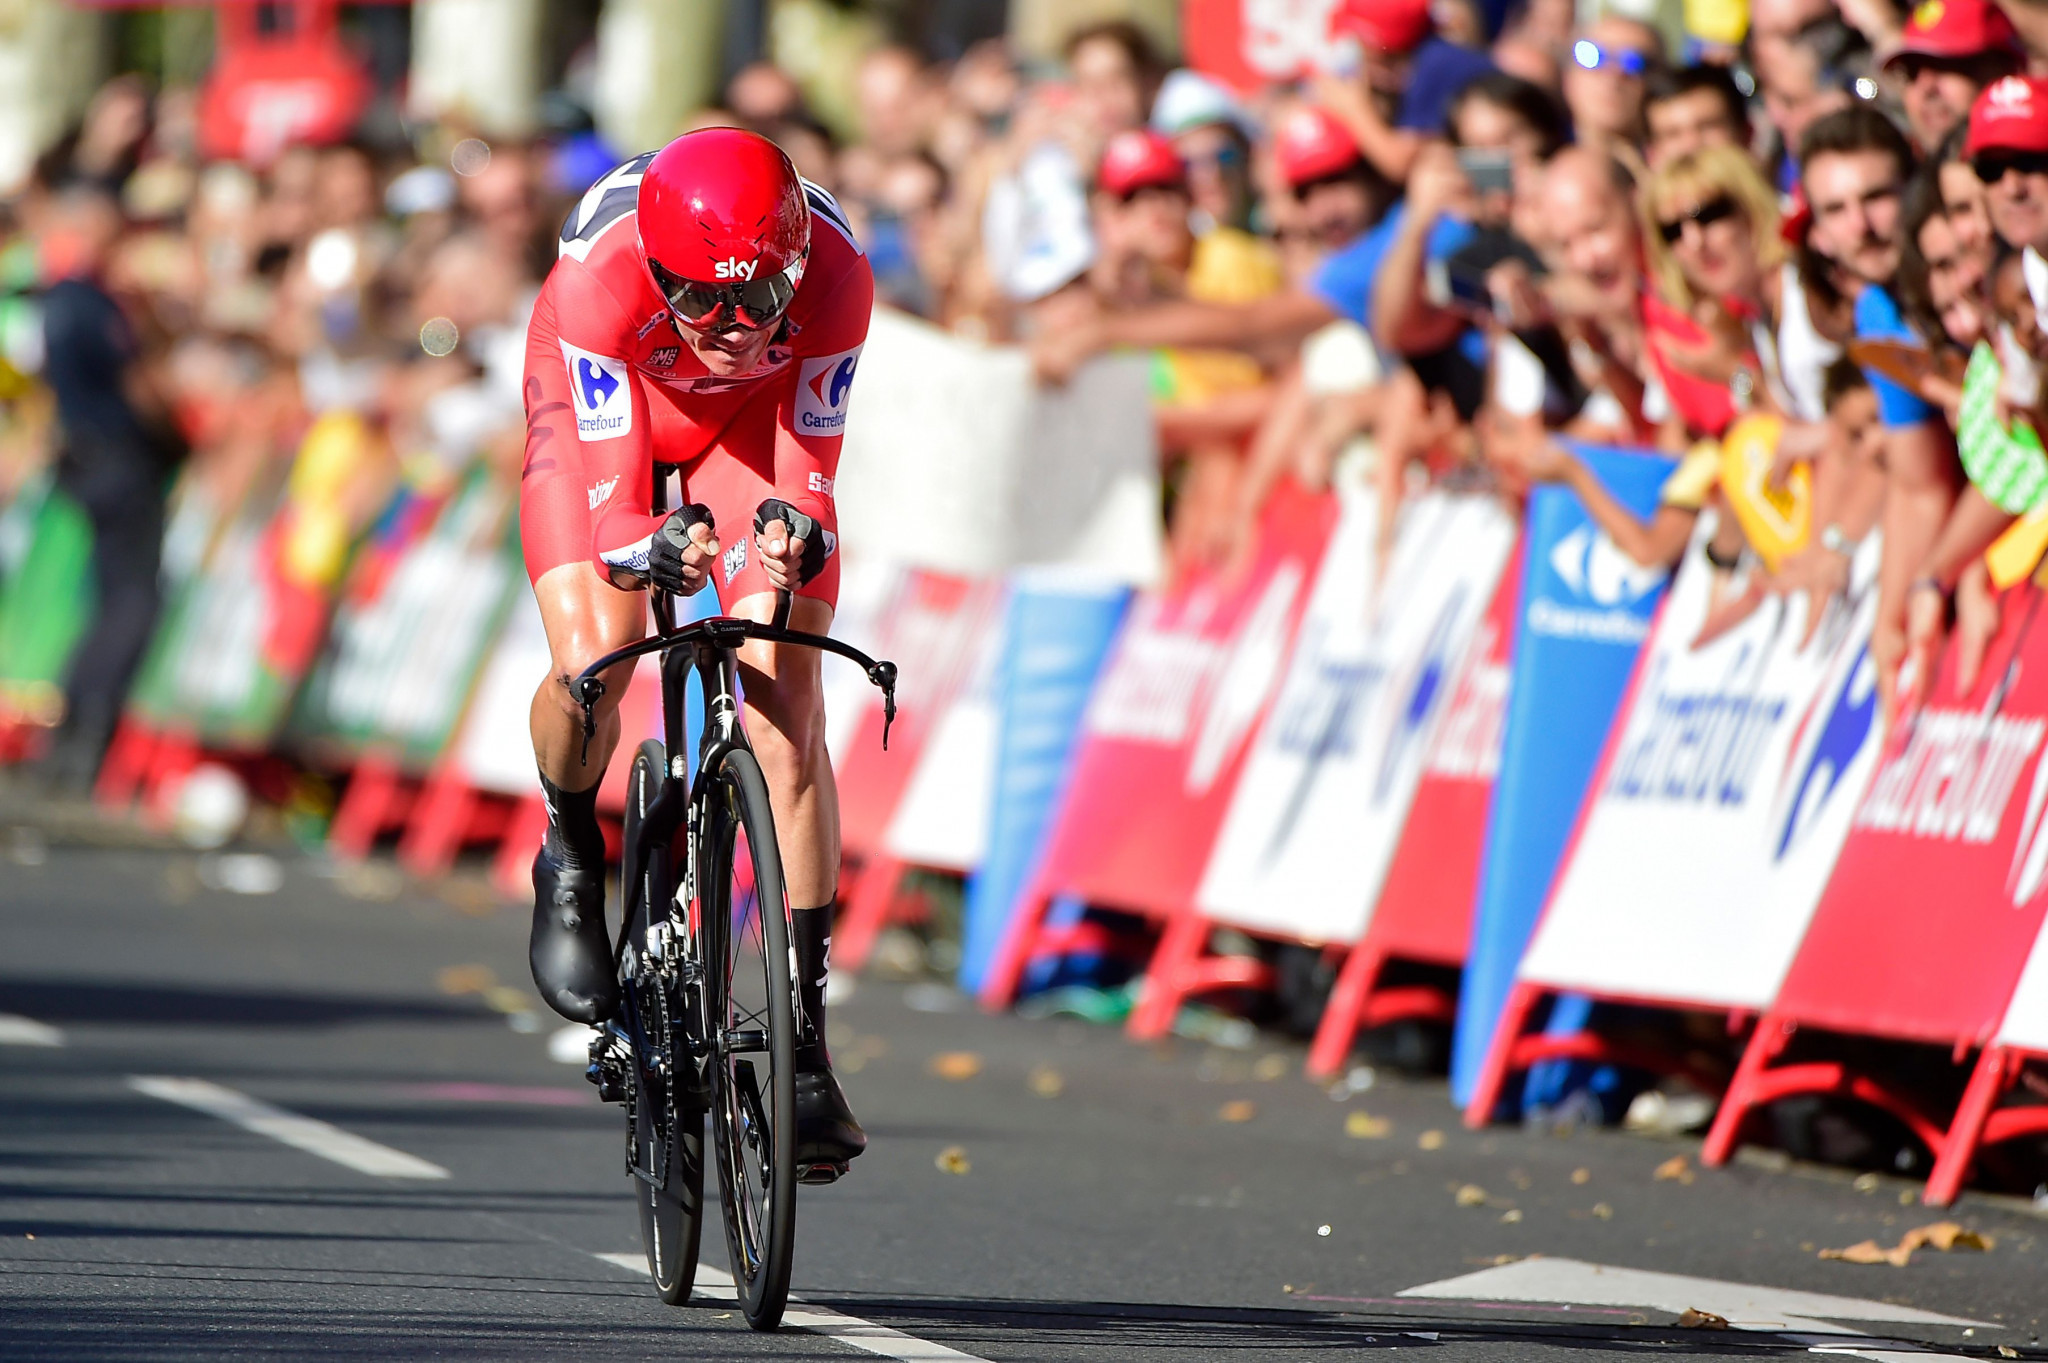 Froome seals stunning time trial success to close in on Vuelta and Tour de France double